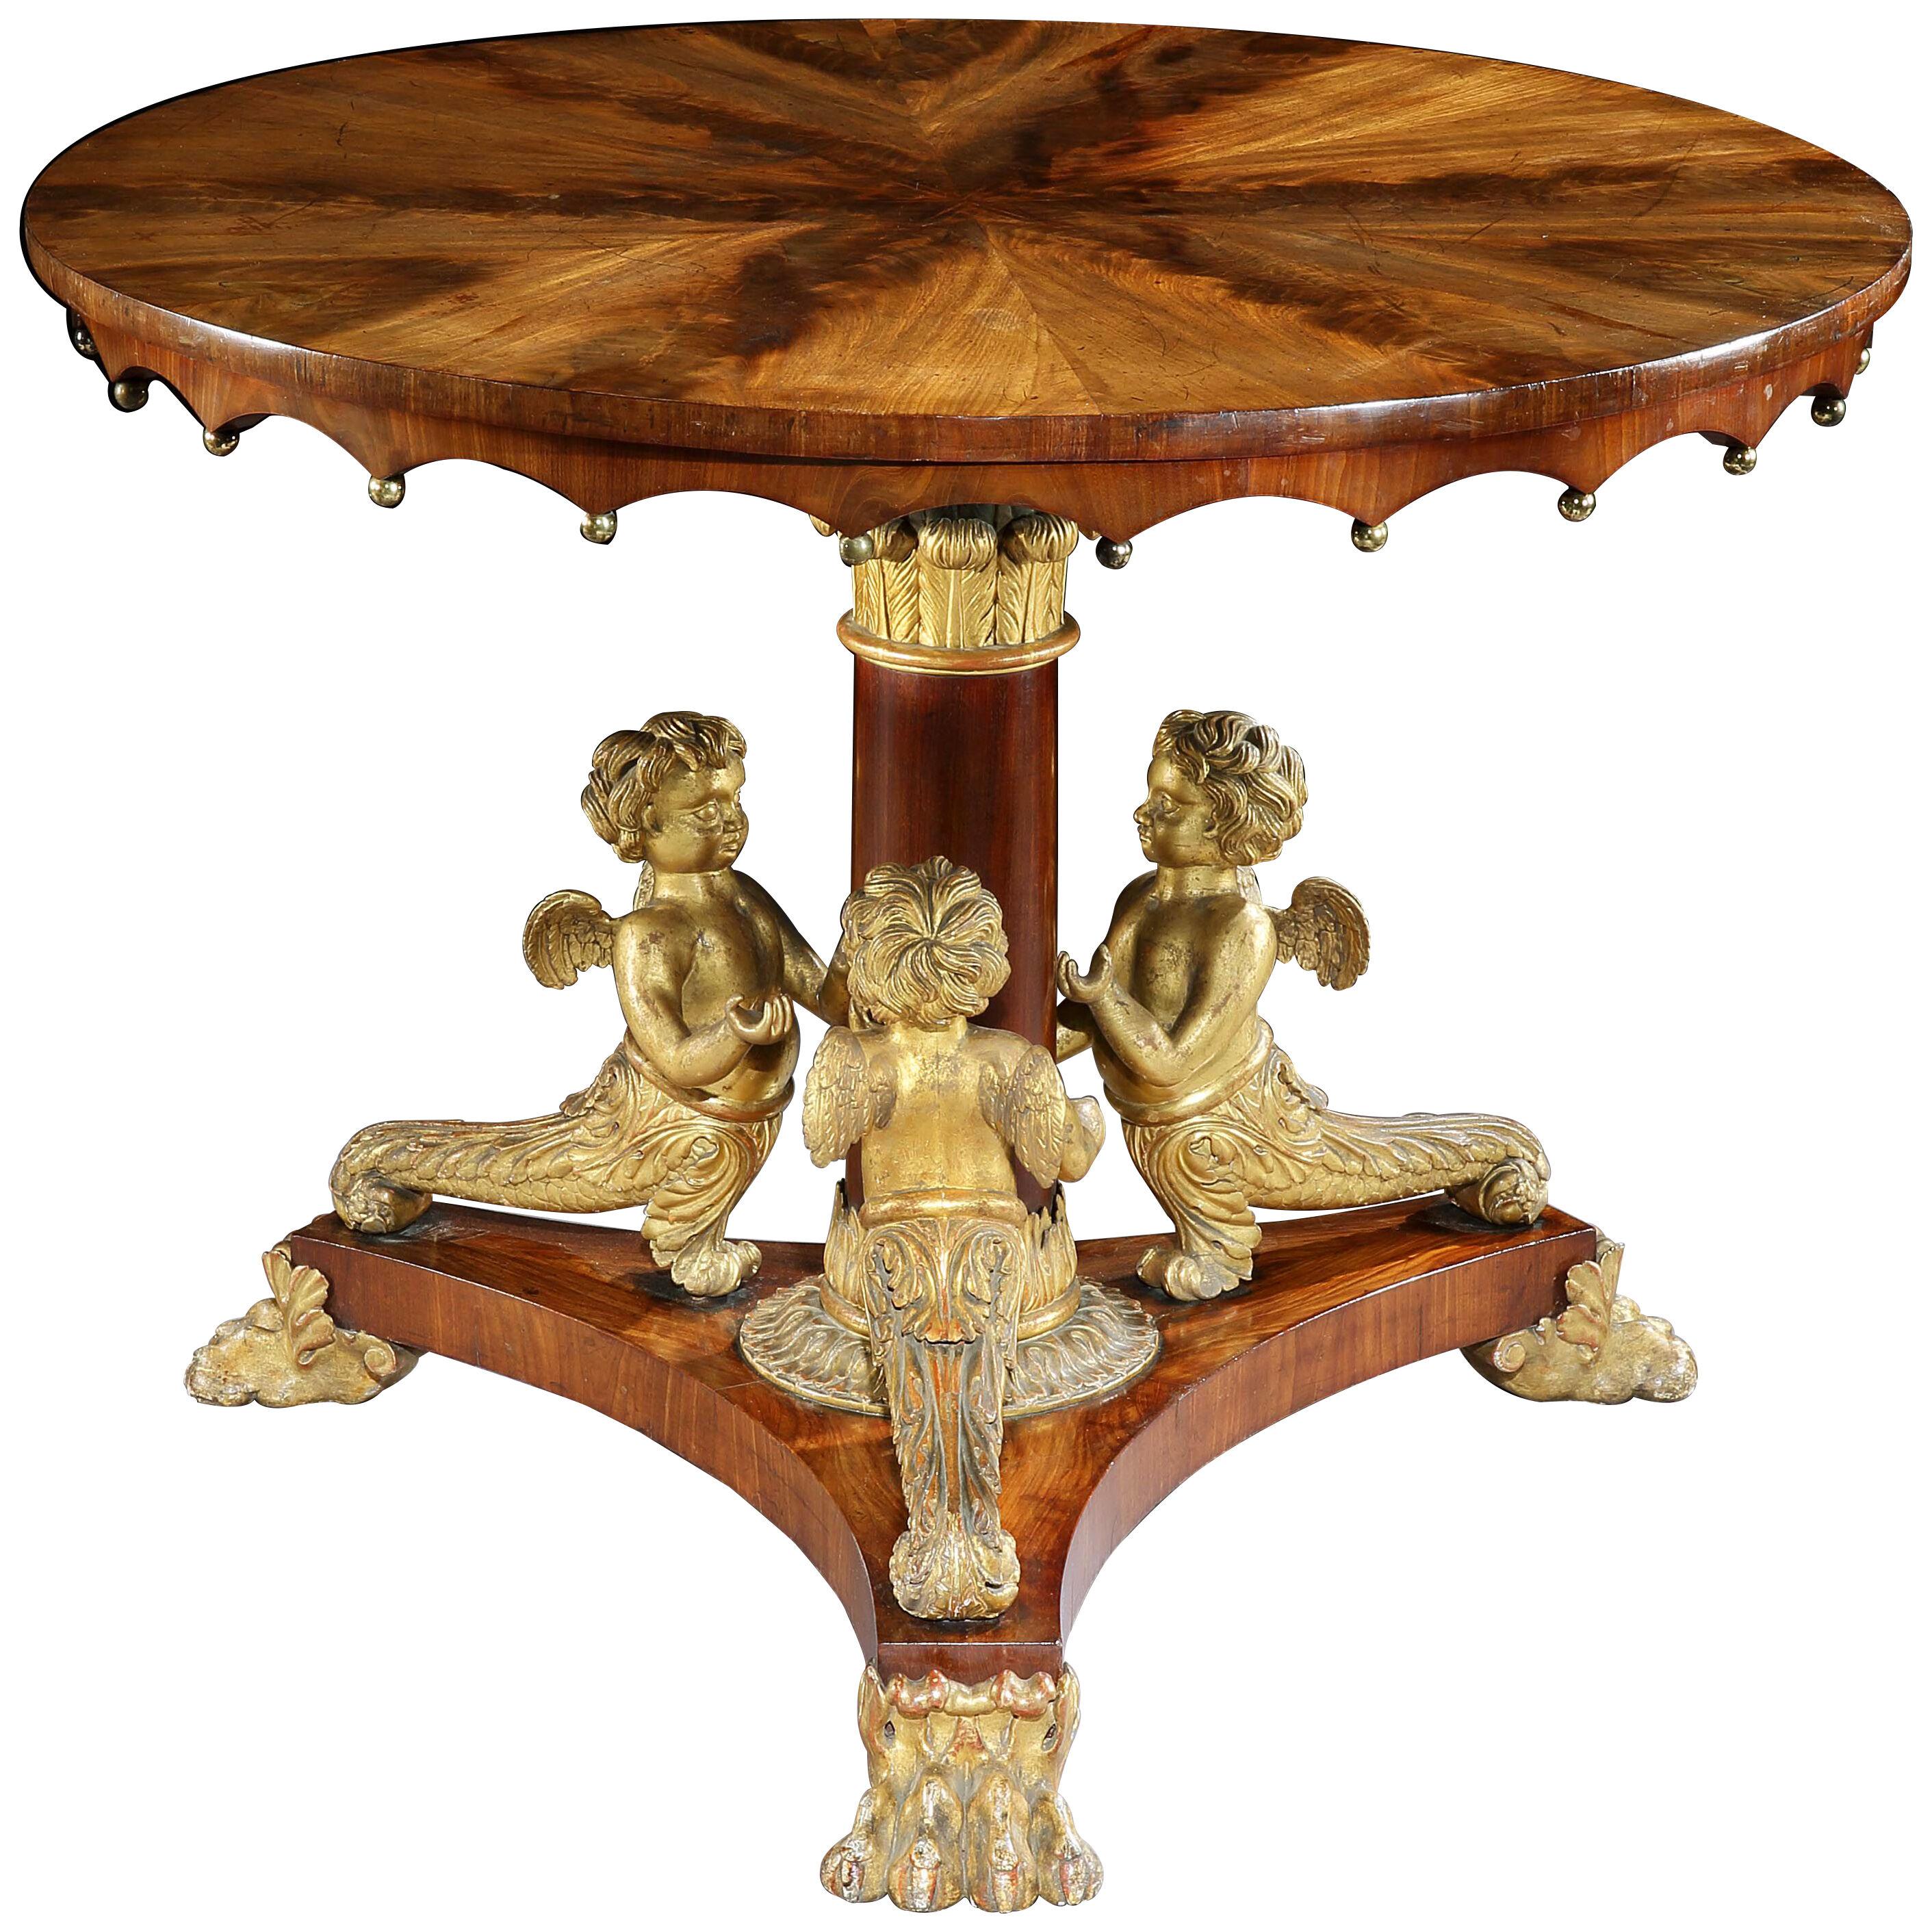 An Early 19th Century Mahogany and Carved Gilt Centre Table